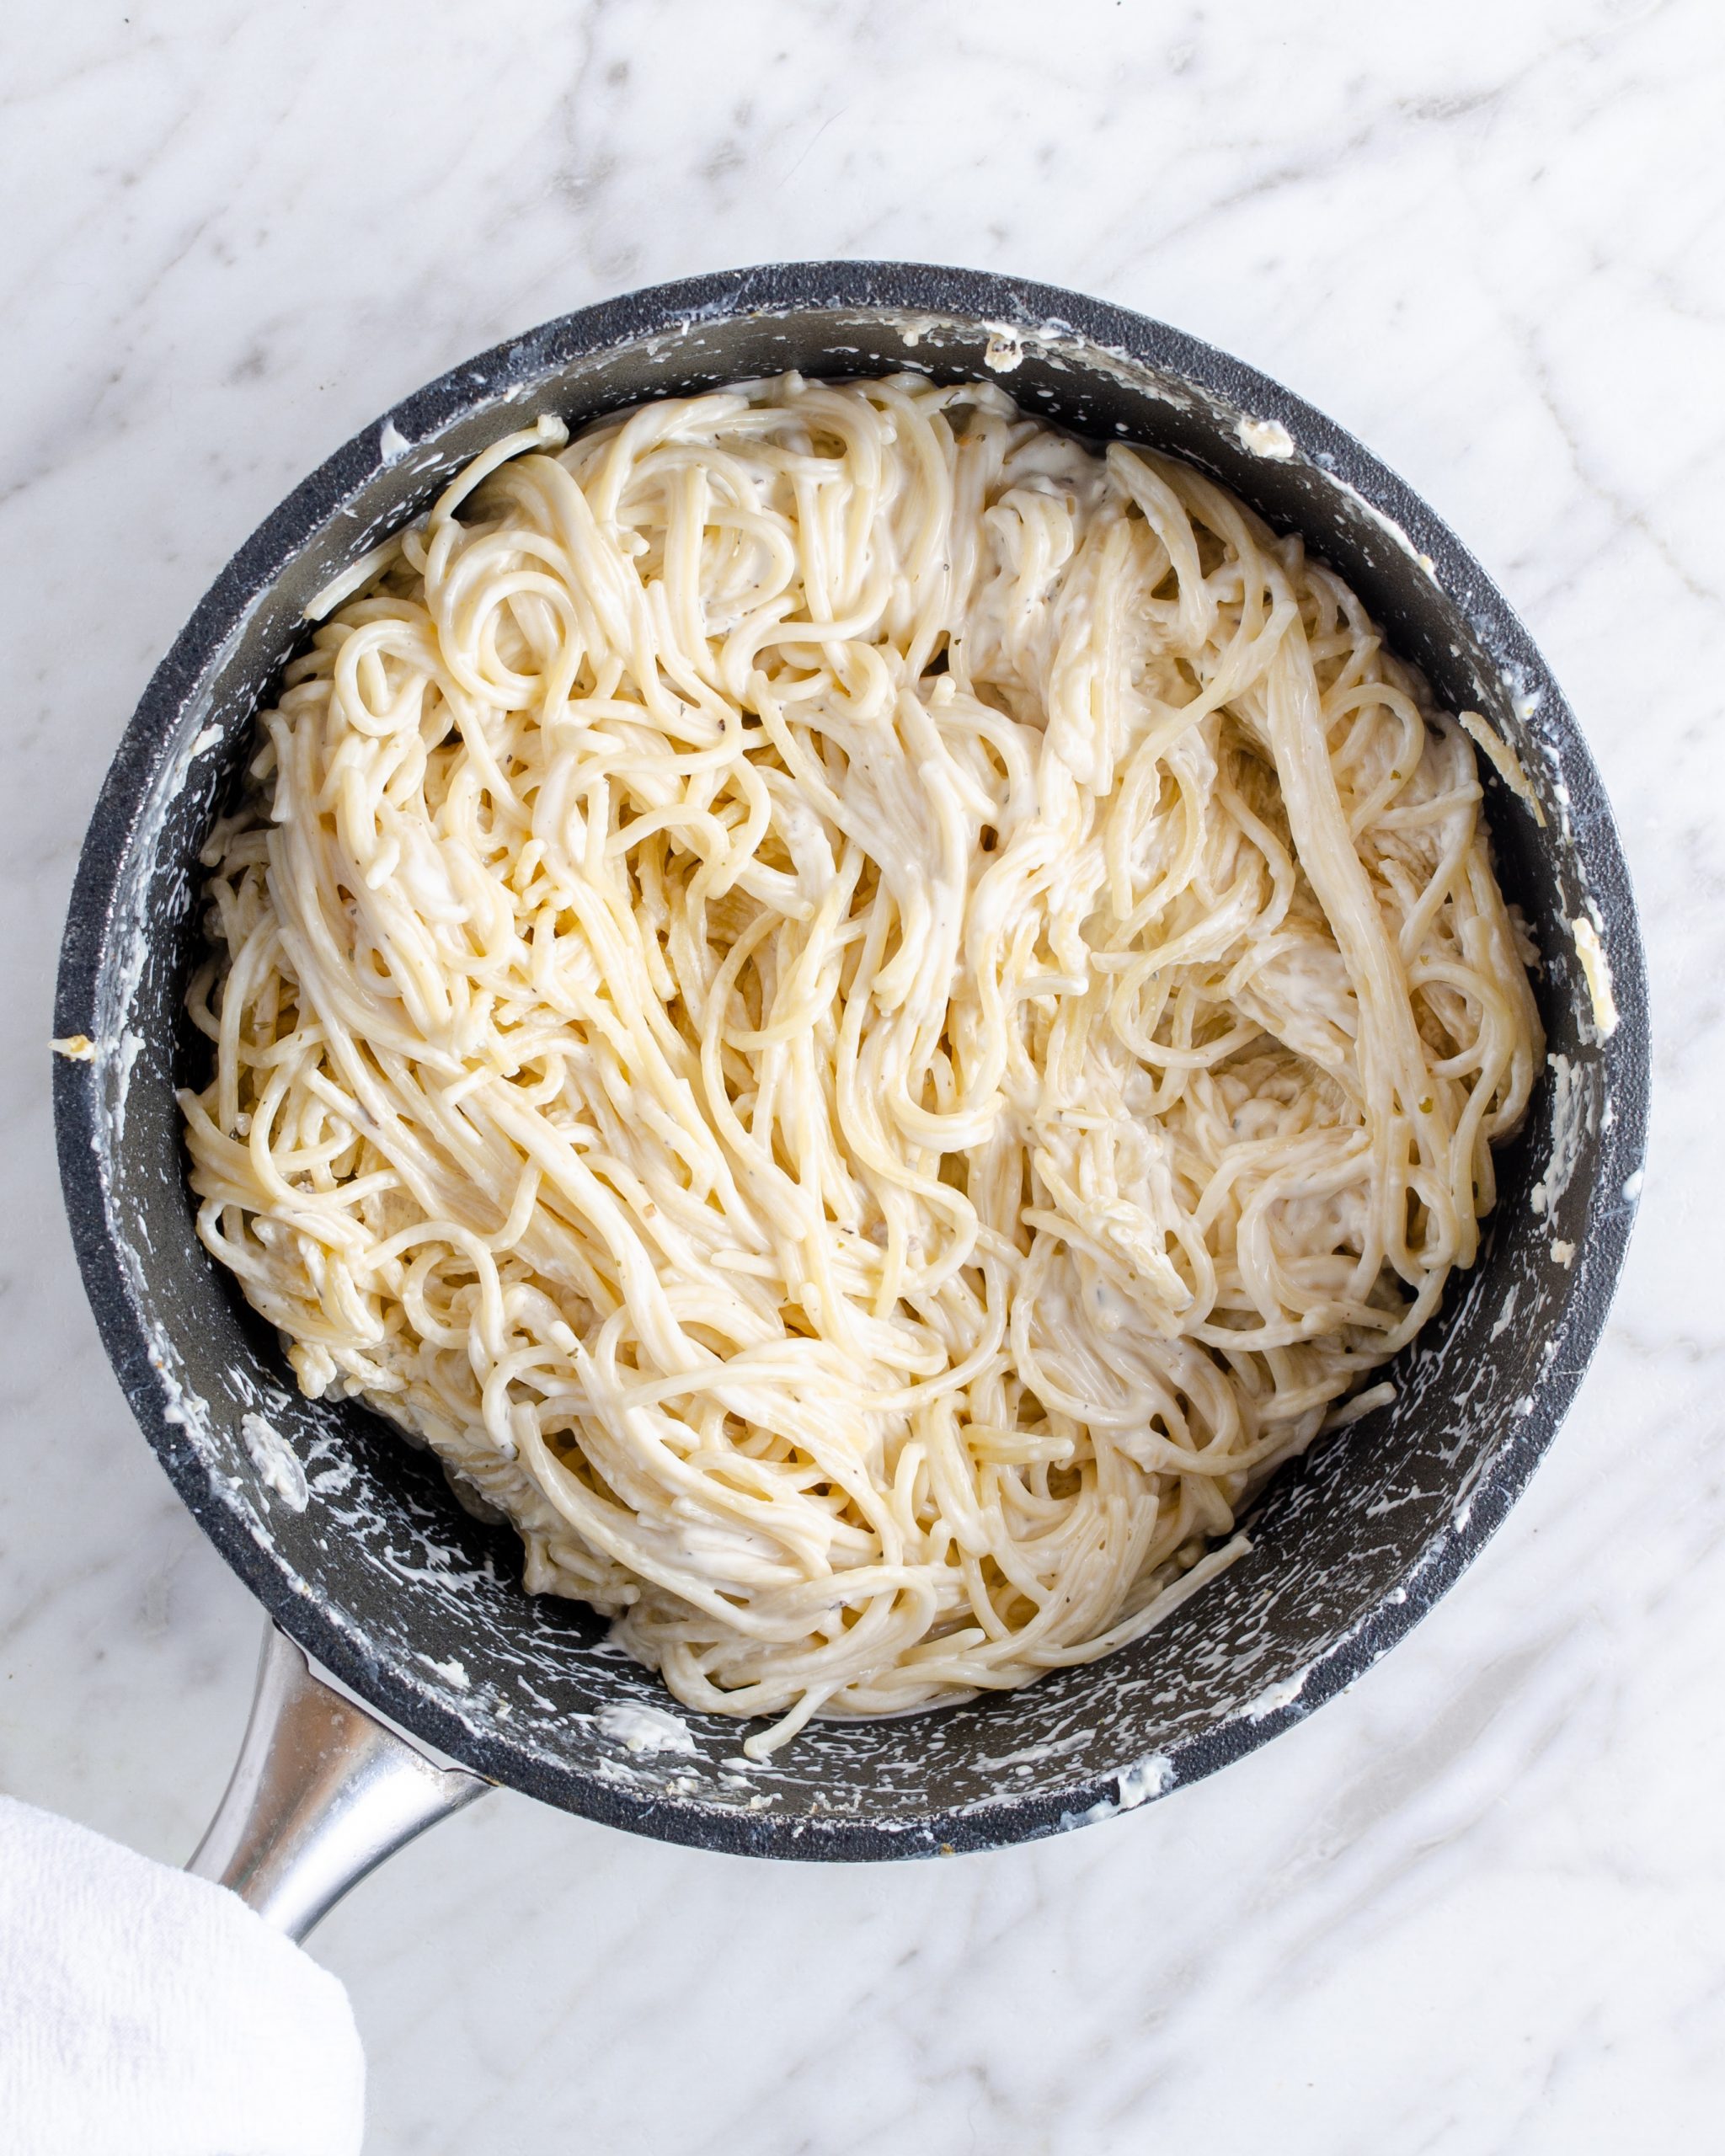 Add the hot spaghetti to a large mixing bowl with the cream cheese, minced garlic, garlic salt, and Italian seasoning. Stir to combine until the cheese has melted